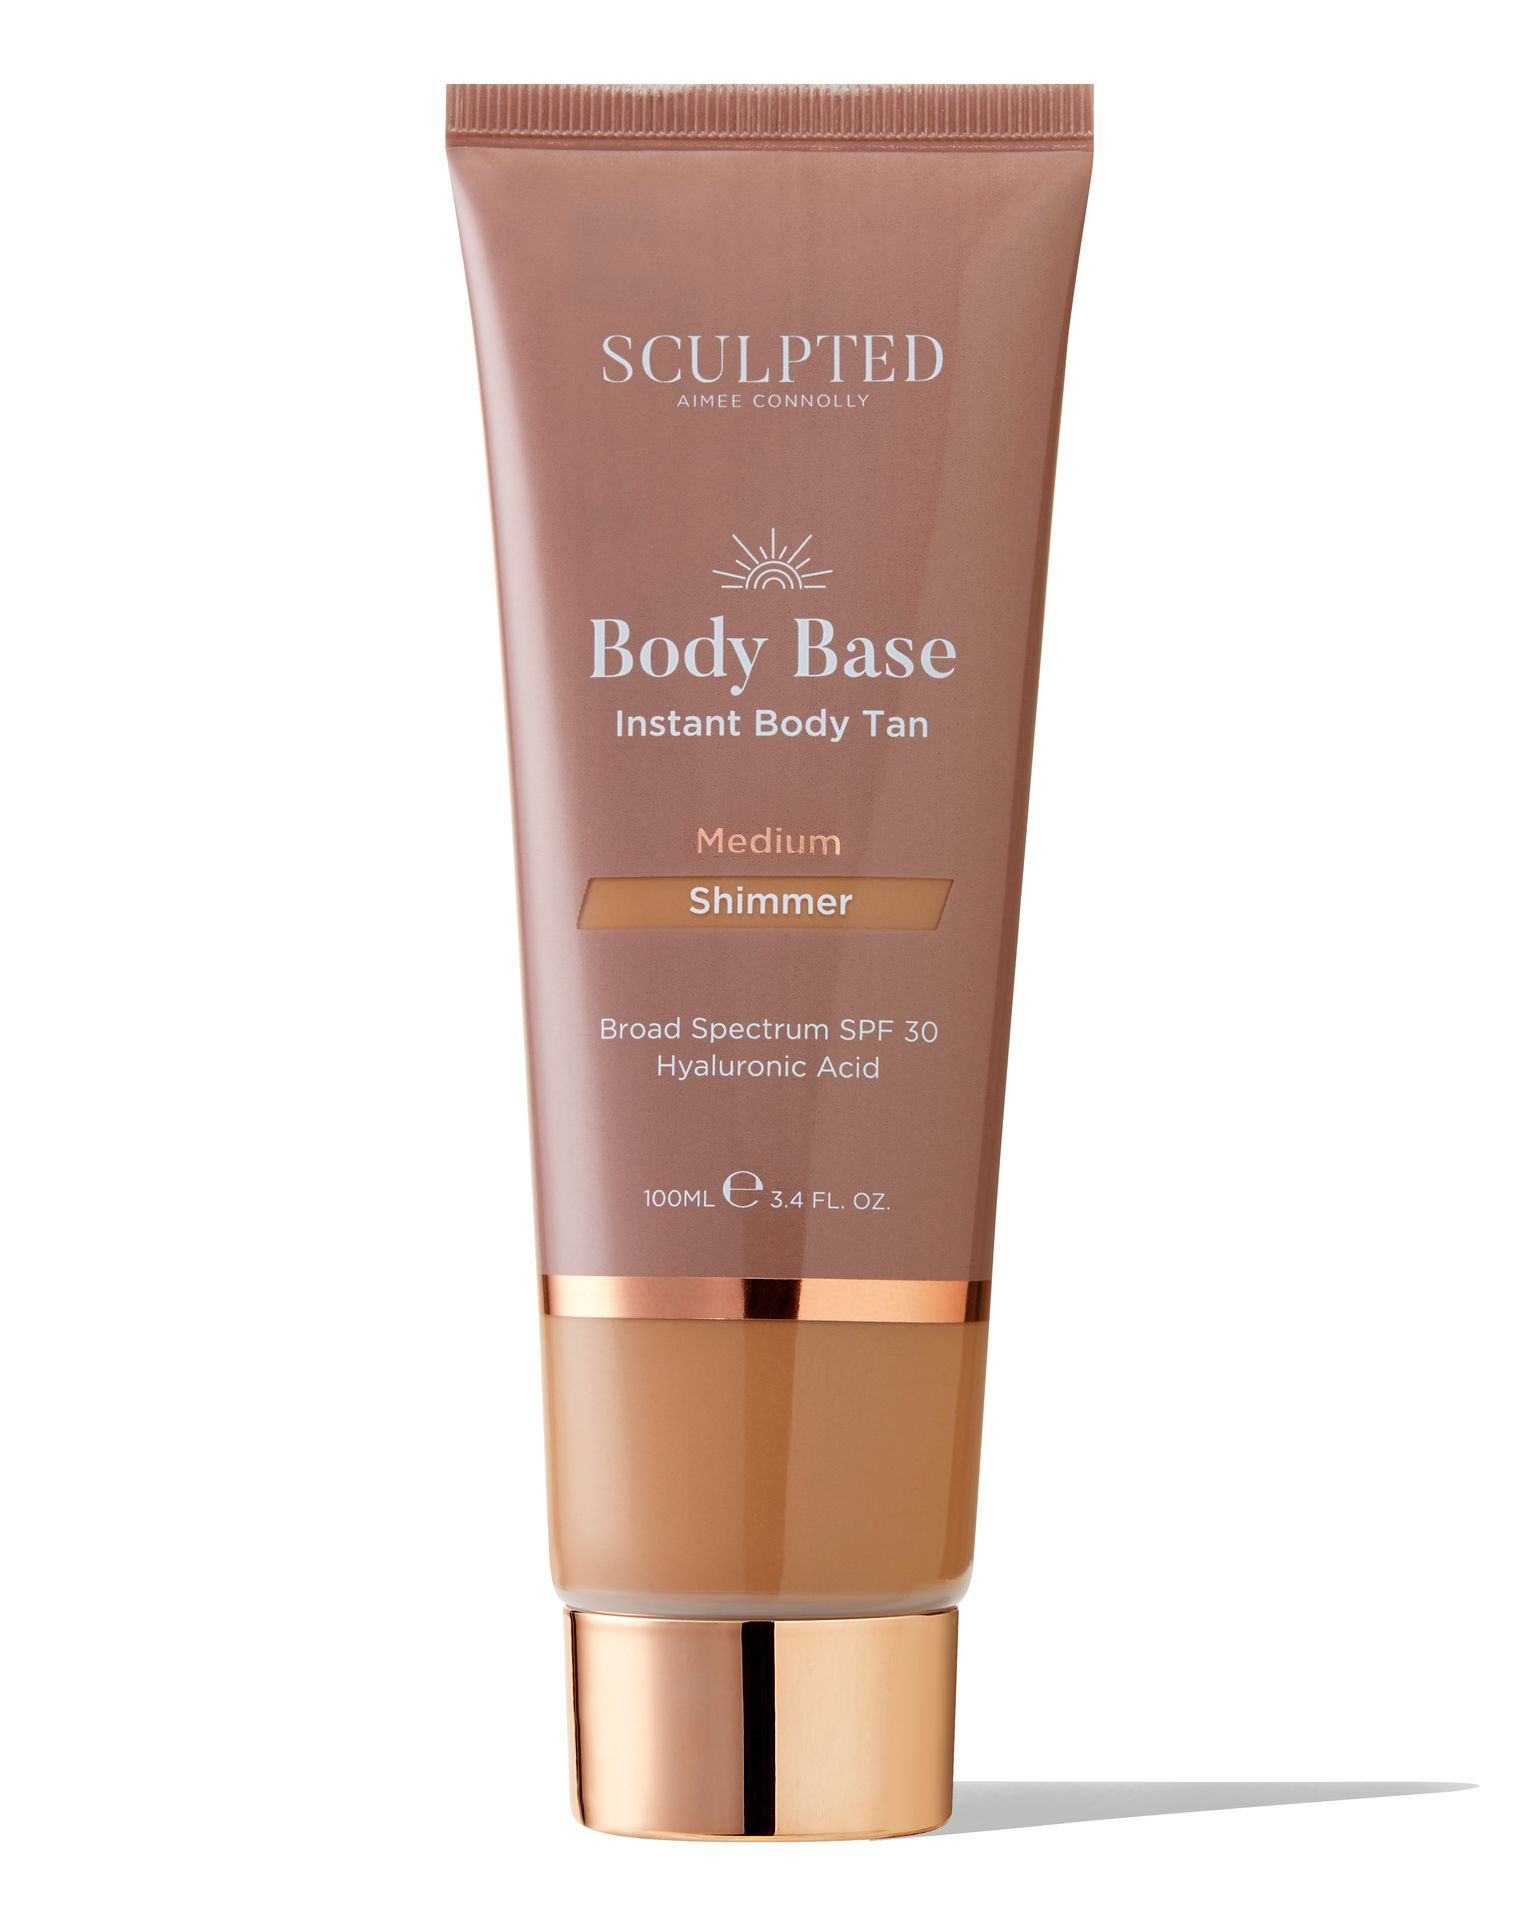 Sculpted By Aimee Connolly Body Base Instant Body Tan Shimmer Medium